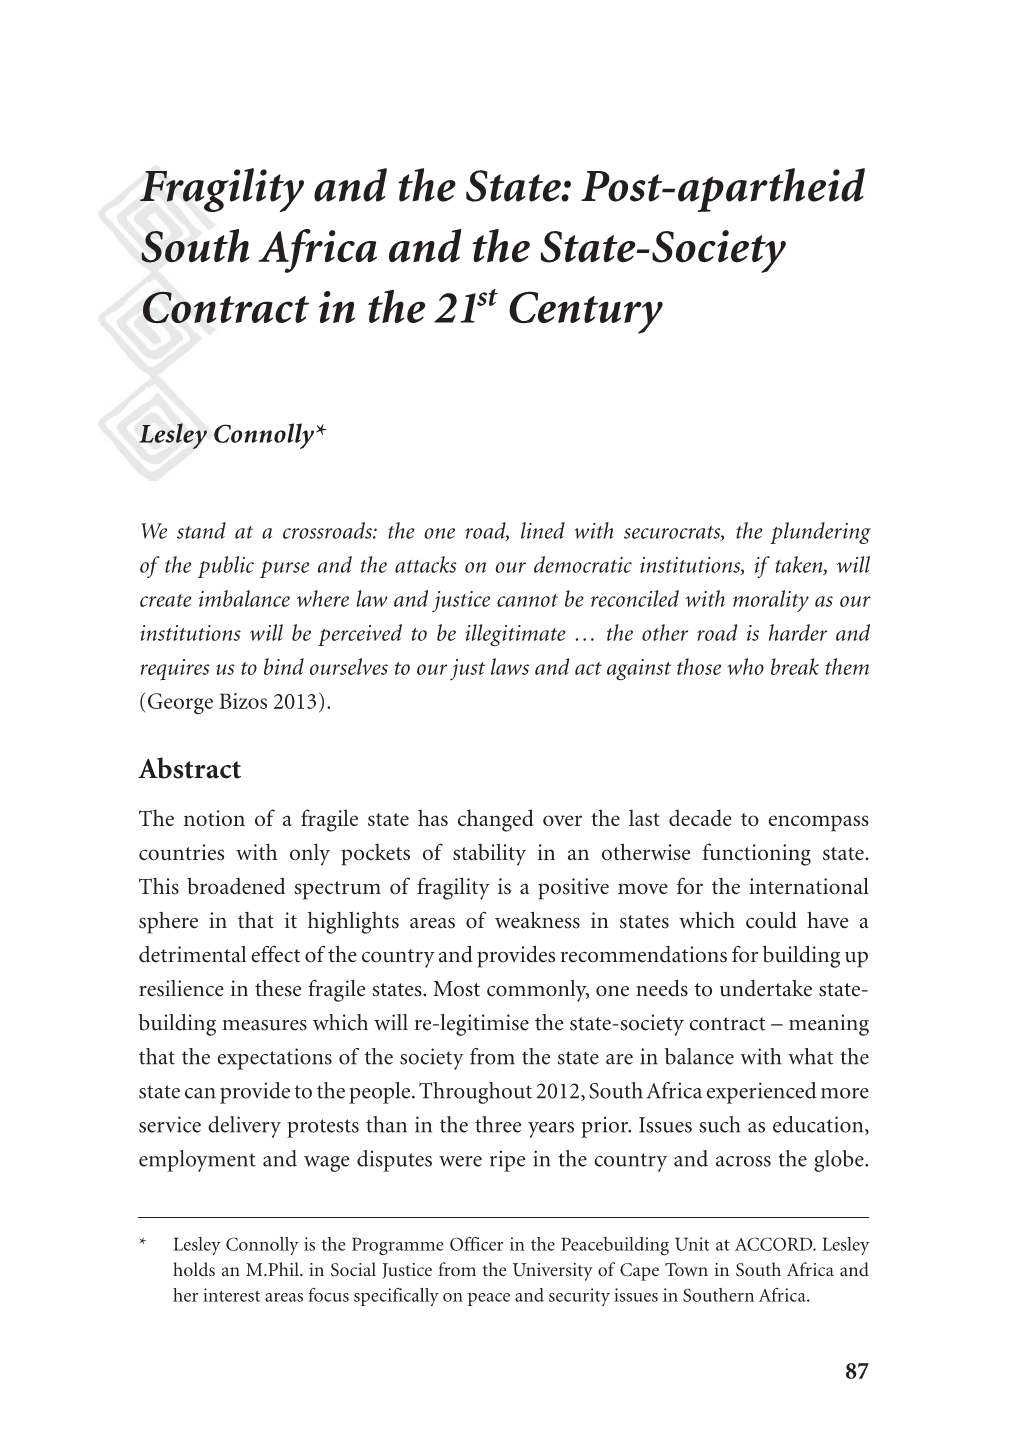 Post-Apartheid South Africa and the State-Society Contract in the 21St Century